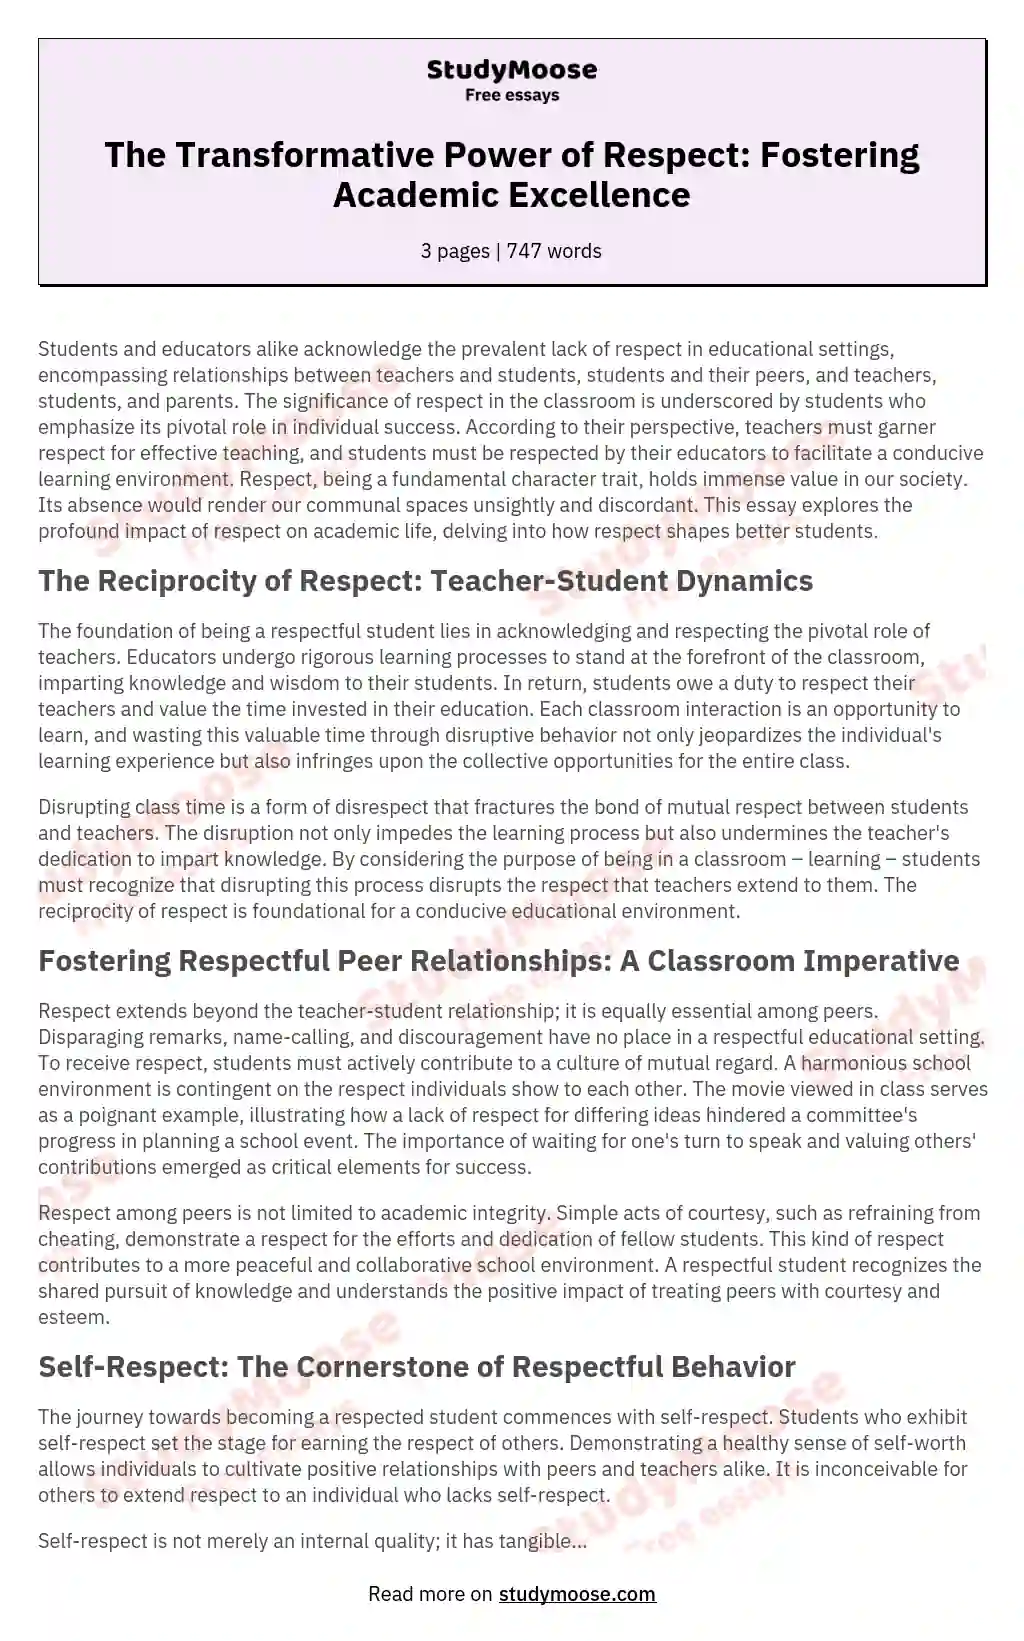 The Transformative Power of Respect: Fostering Academic Excellence essay